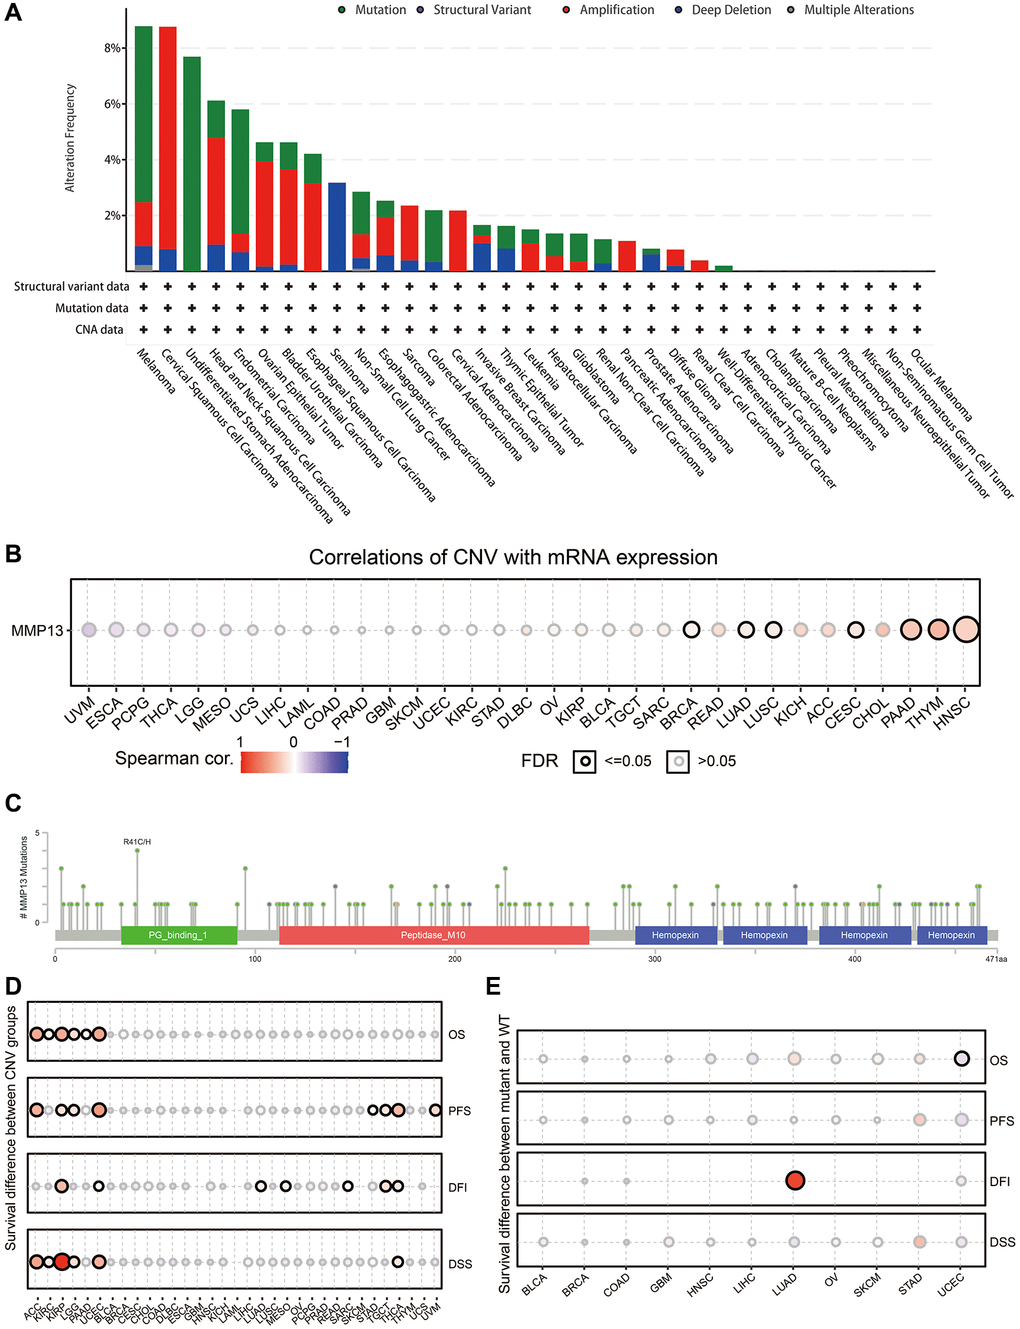 Mutation features of MMP13 in each cancer. (A) The results are displayed as a histogram of the genetic alteration type and frequency of MMP13 in each cancer. CNA, copy-number alterations. (B) Pan-cancer analysis of the correlation between CNV and mRNA expression of MMP13. CNV, copy number variations. CNV is equivalent to CNA in the TCGA database. Blue bubbles represent a negative correlation, and red bubbles represent a positive correlation. Bubble size correlated positively with the FDR significance. The black outline border indicates FDR ≤ 0.05. (C) The mutation diagram of MMP13 in pan-cancer across protein domains from the cBioPortal database. (D) Figure summarizes the survival difference between CNV groups in each cancer. The bubble color from blue to red represents the hazard ratio from low to high. Bubble size is positively correlated with the Cox P value significance. The black outline border indicates Cox P value ≤ 0.05. (E) The survival difference between mutant and wide type groups in pan-cancer. Hazard ratios and Cox p-values displayed by the color and size of bubbles.